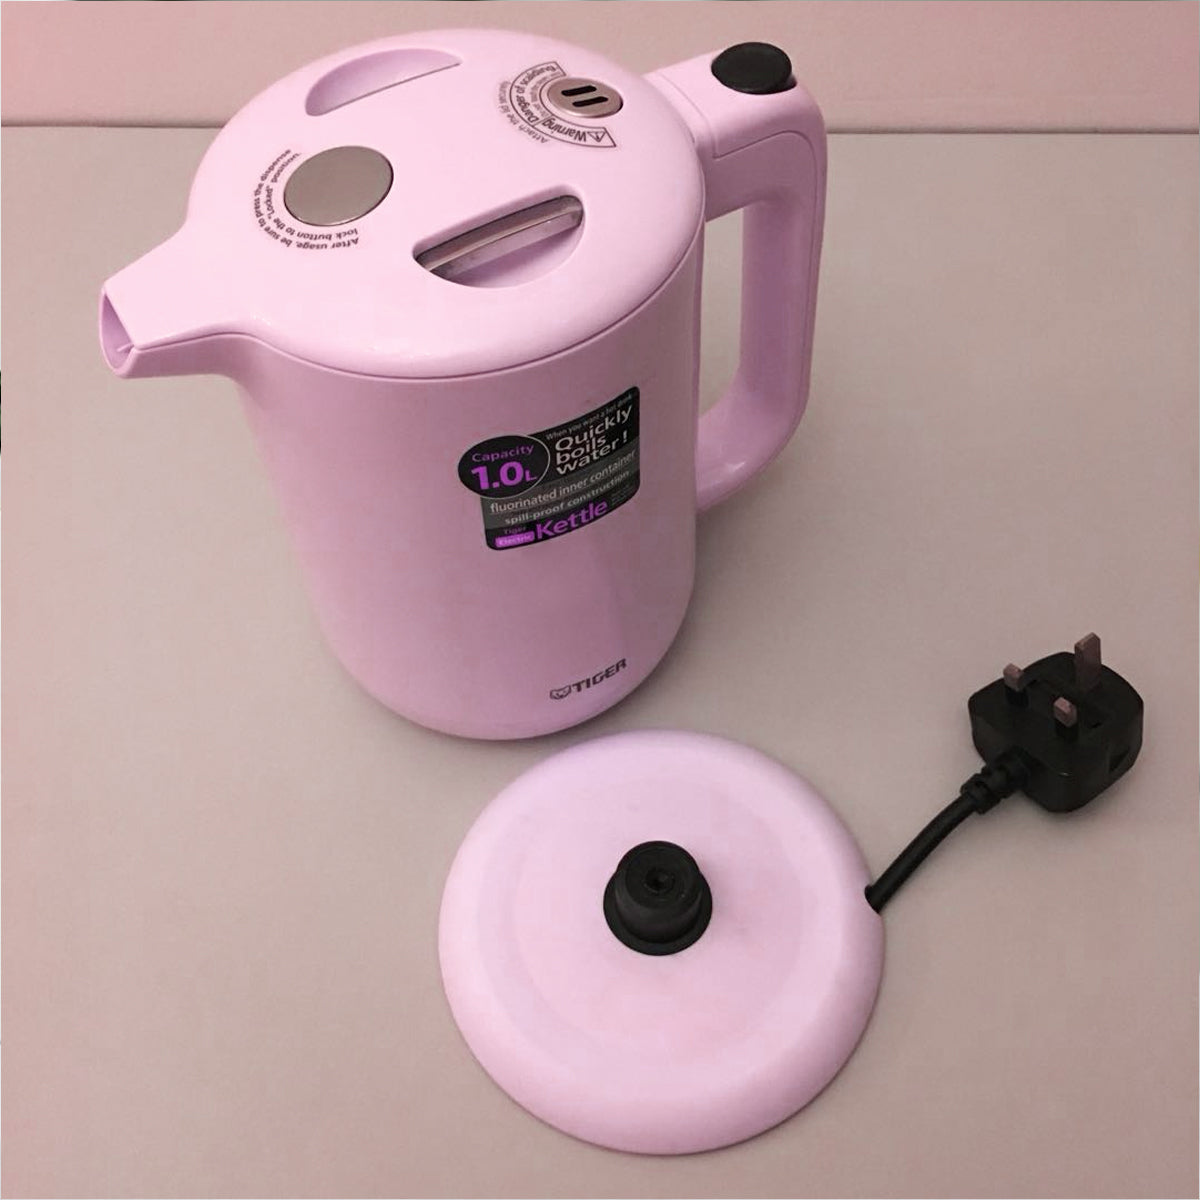 Tiger Japan Auto Shut Electric Kettle Double wall 1 Ltr Pink